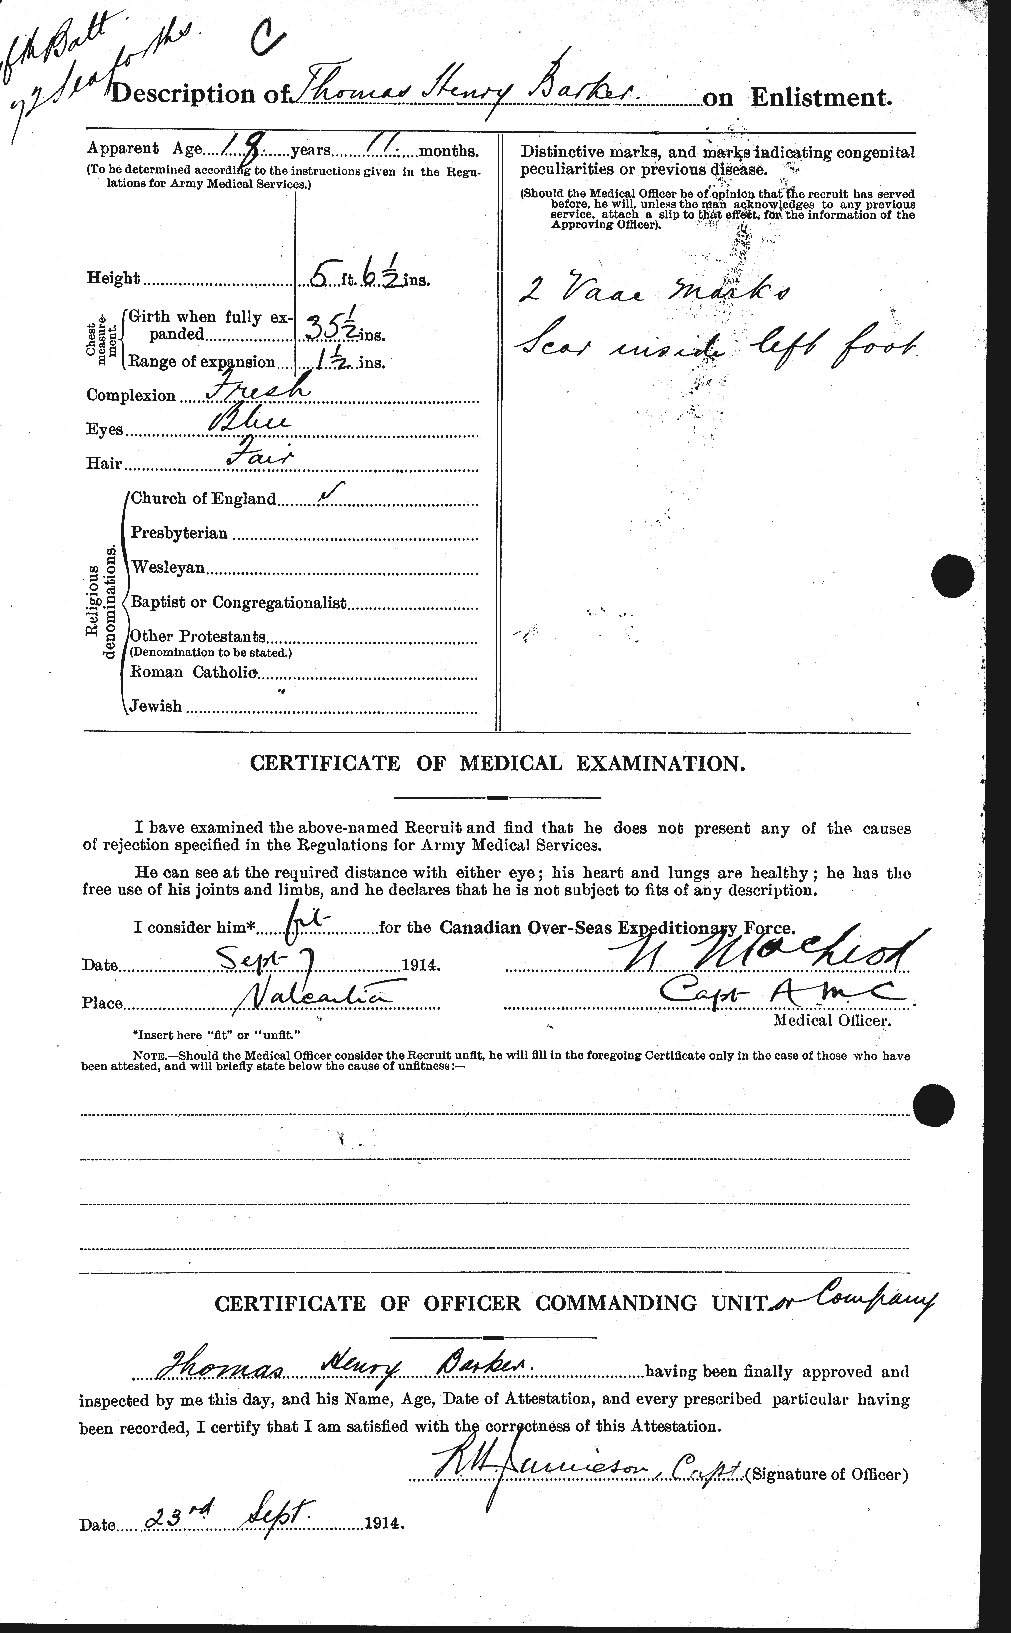 Personnel Records of the First World War - CEF 226931b